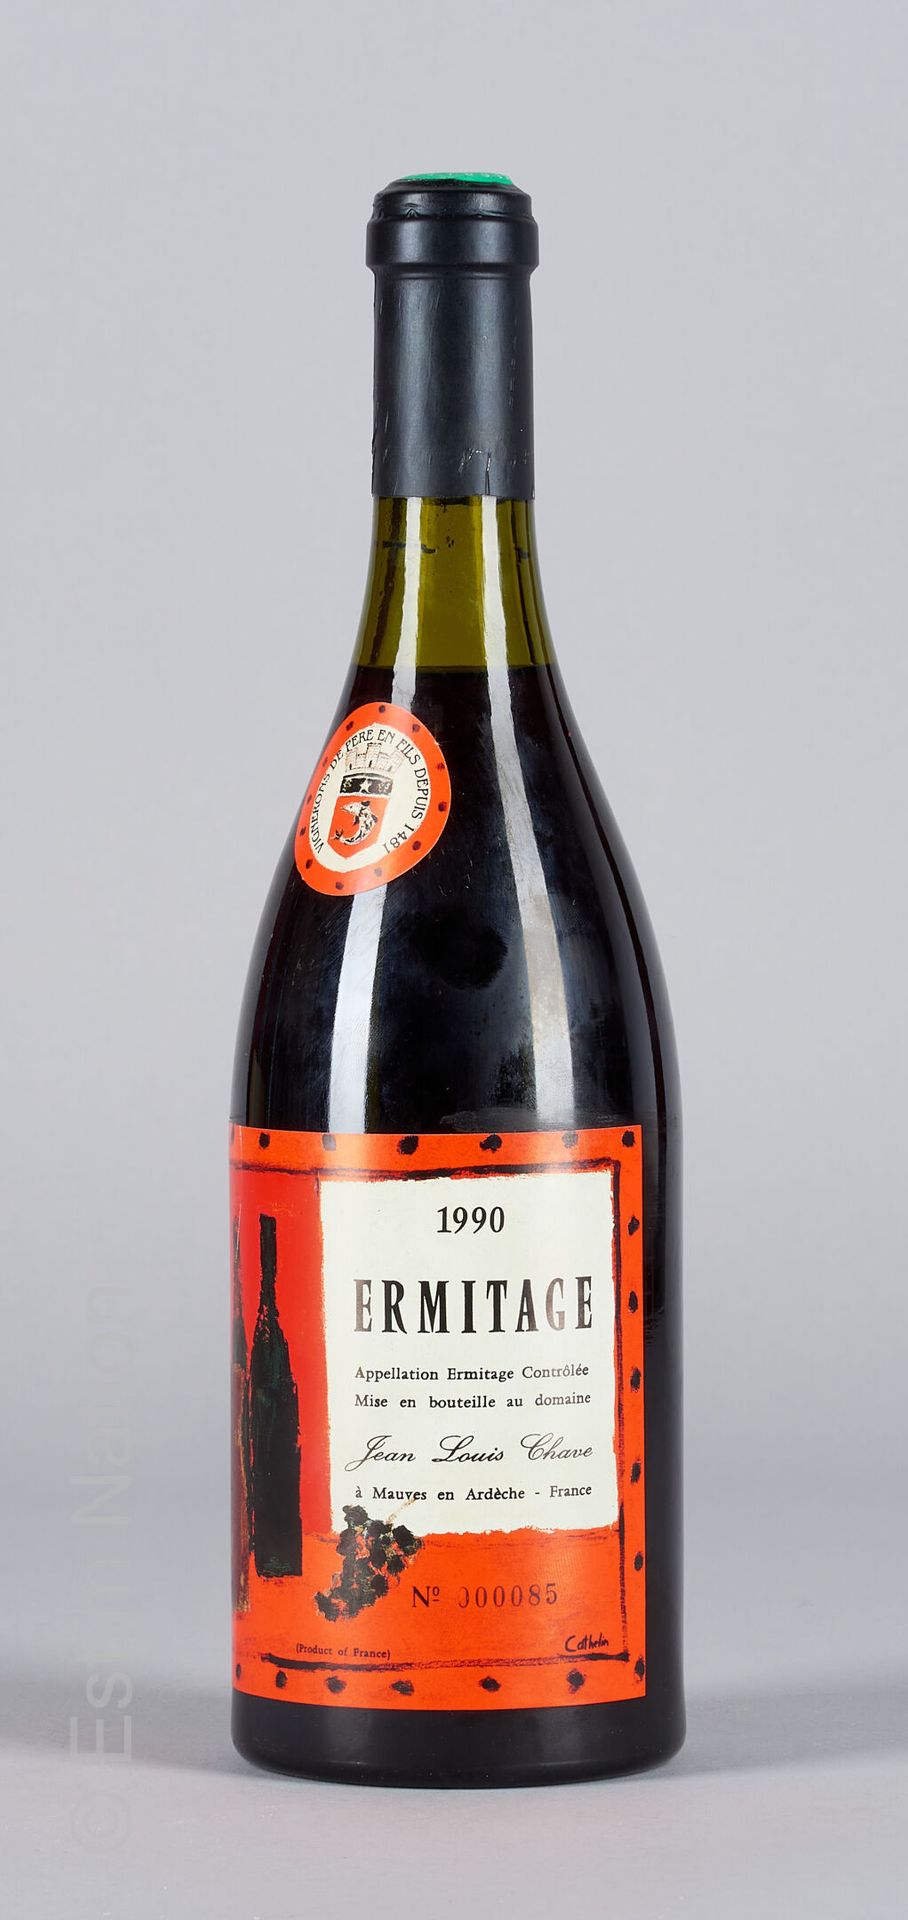 CUVEE CATHELIN 1 botella ERMITAGE 1990 Cuvée Cathelin Jean-Louis Chave

(N. Entr&hellip;